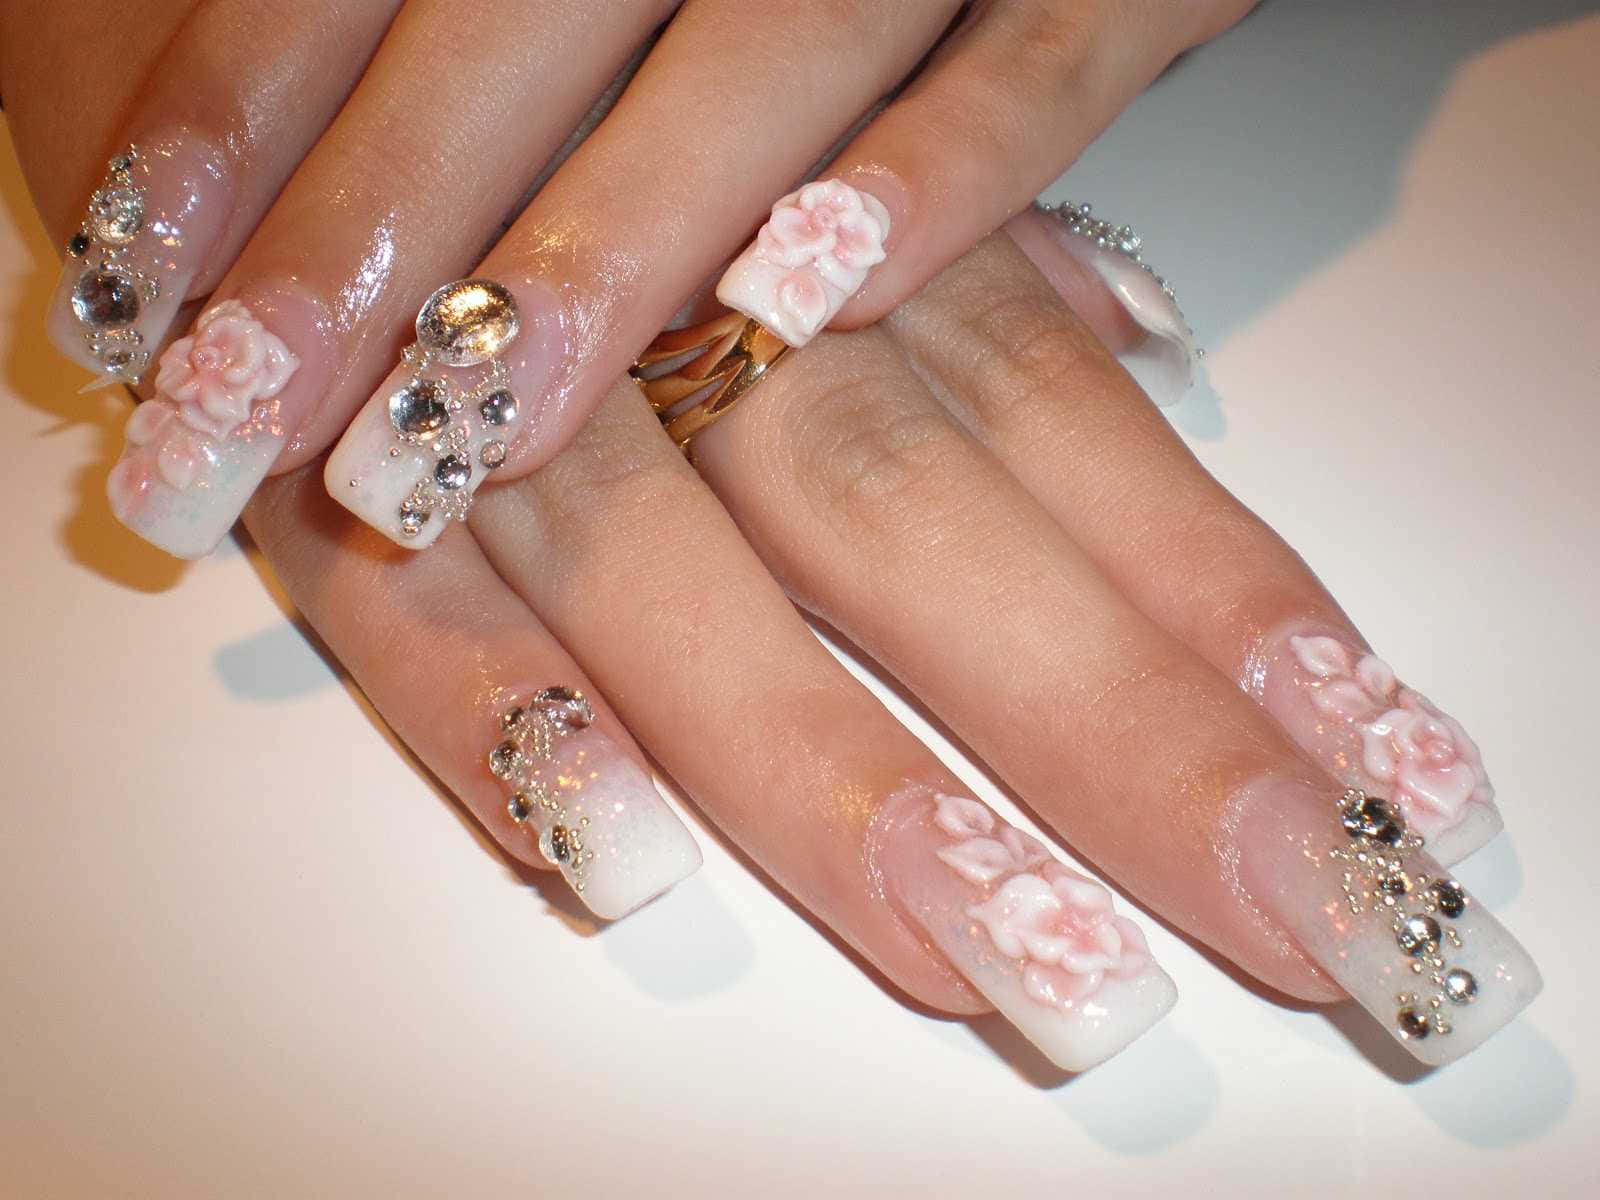 A Woman's Nails With Flowers And Diamonds